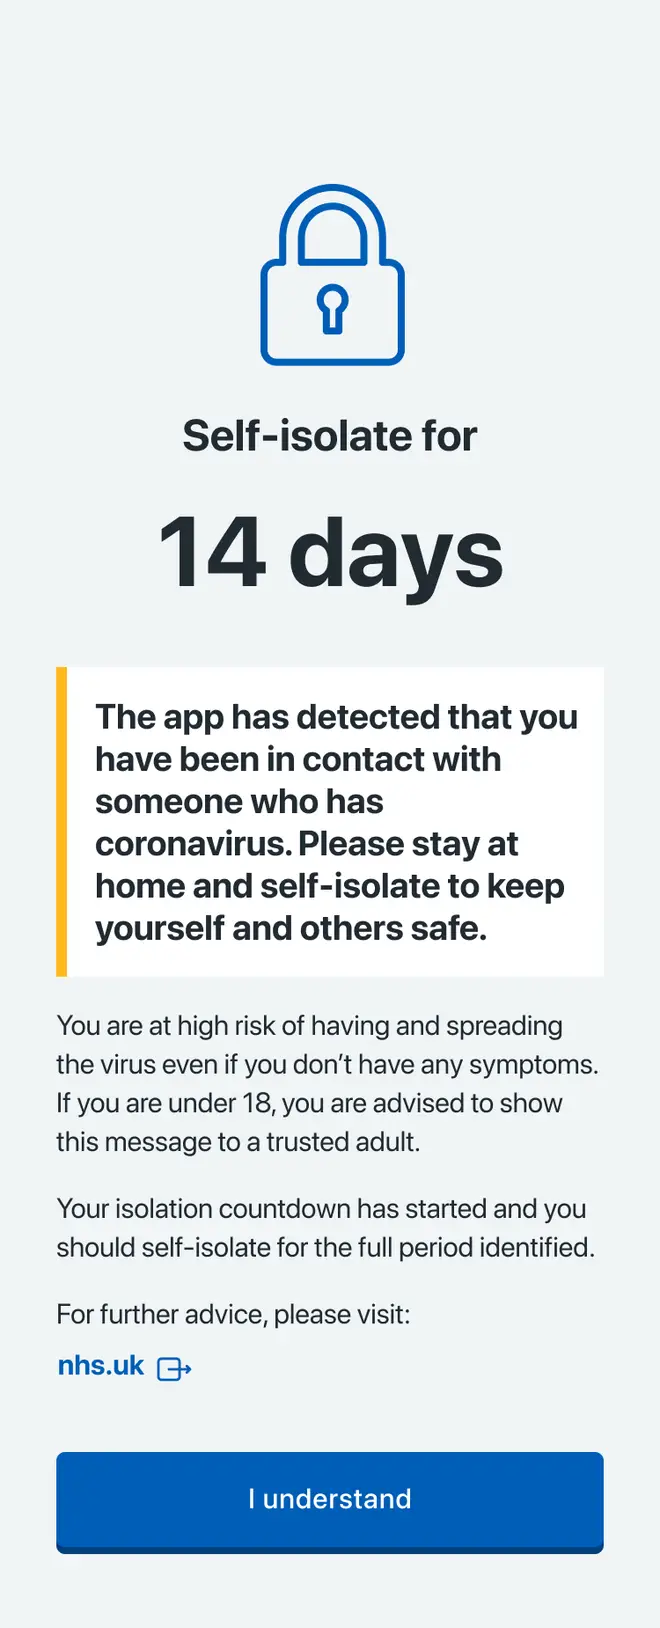 If you test positive for coronavirus (COVID-19), the app will tell you to self-isolate. If you are under 18, you are advised to show the alert to a trusted adult.